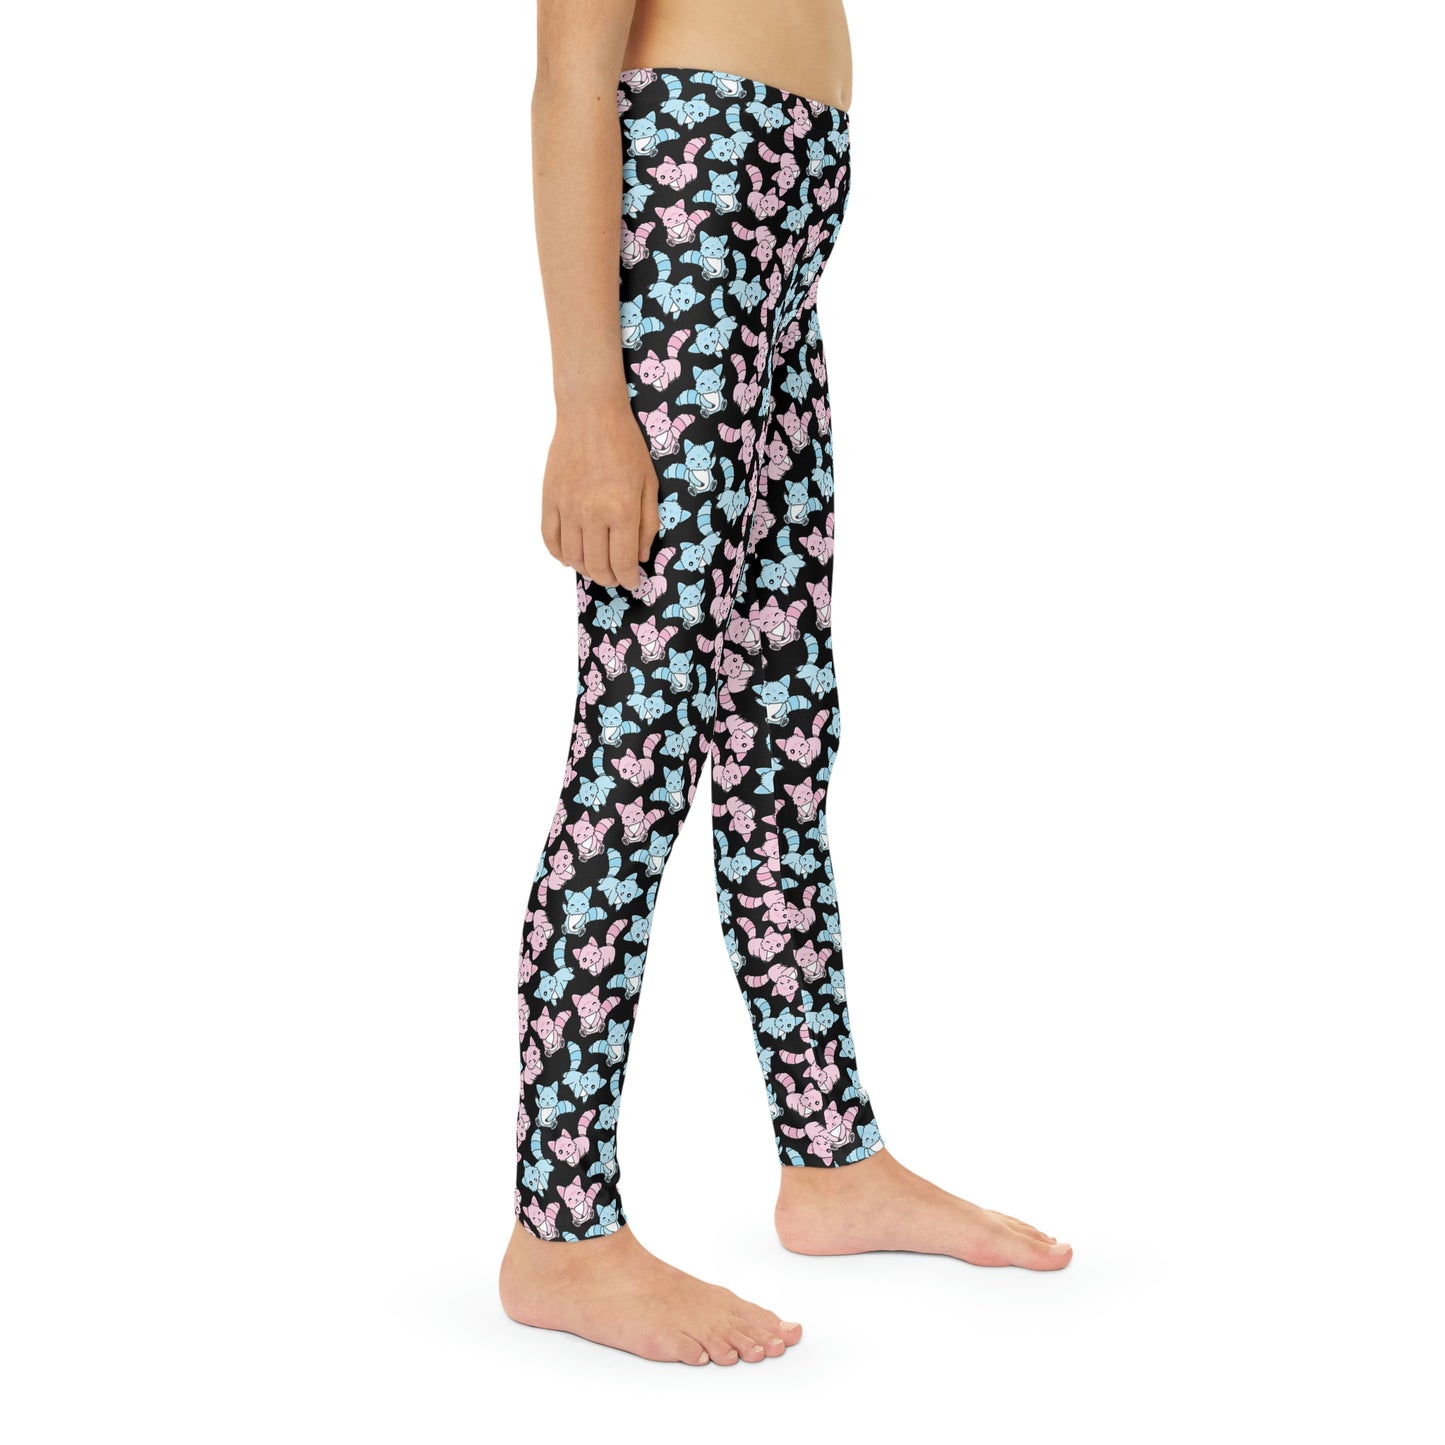 Cat Lovers Pawsome Cute Youth Leggings, One of a Kind Gift - Workout Activewear tights for kids, Granddaughter, Niece Christmas Gift